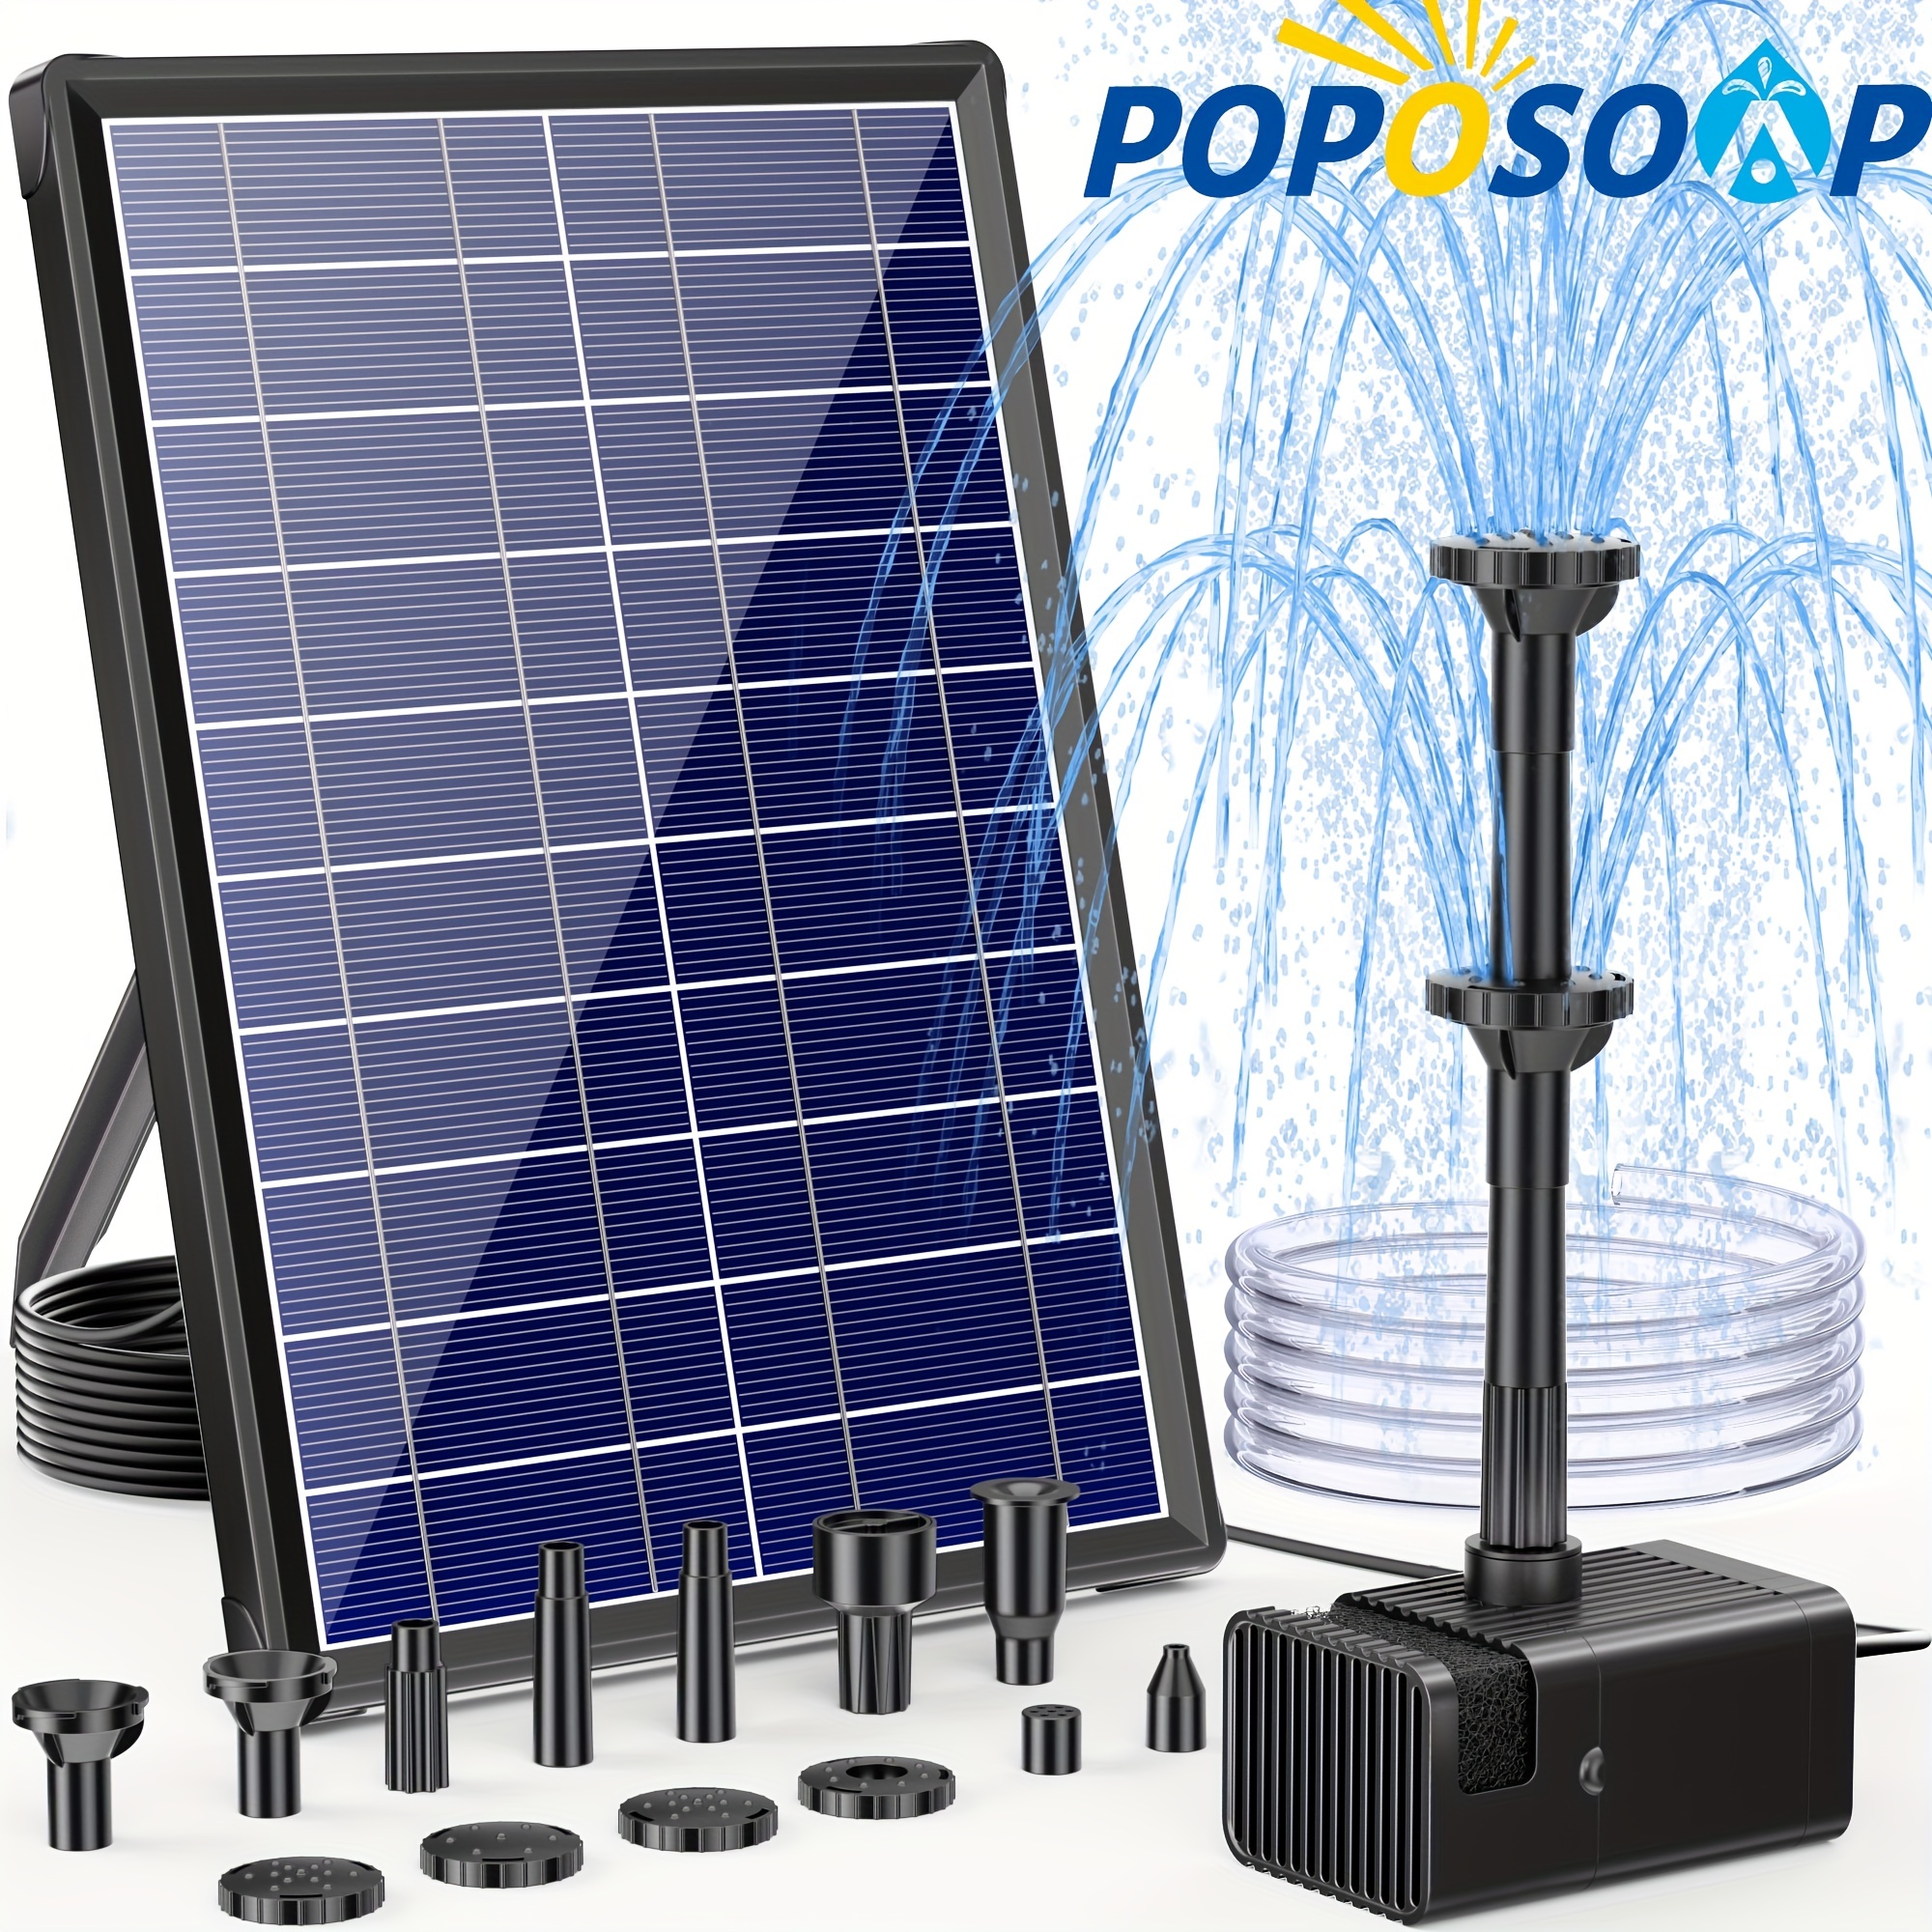 

Poposoap Solar Fountain Pump With 3000mah Battery Backup, 8w Solar Powered Bird Bath Fountain With Dry-run Protection & Double-layer Nozzles 5ft Tubing For Pond, Bird Bath, Backyard Water Feature